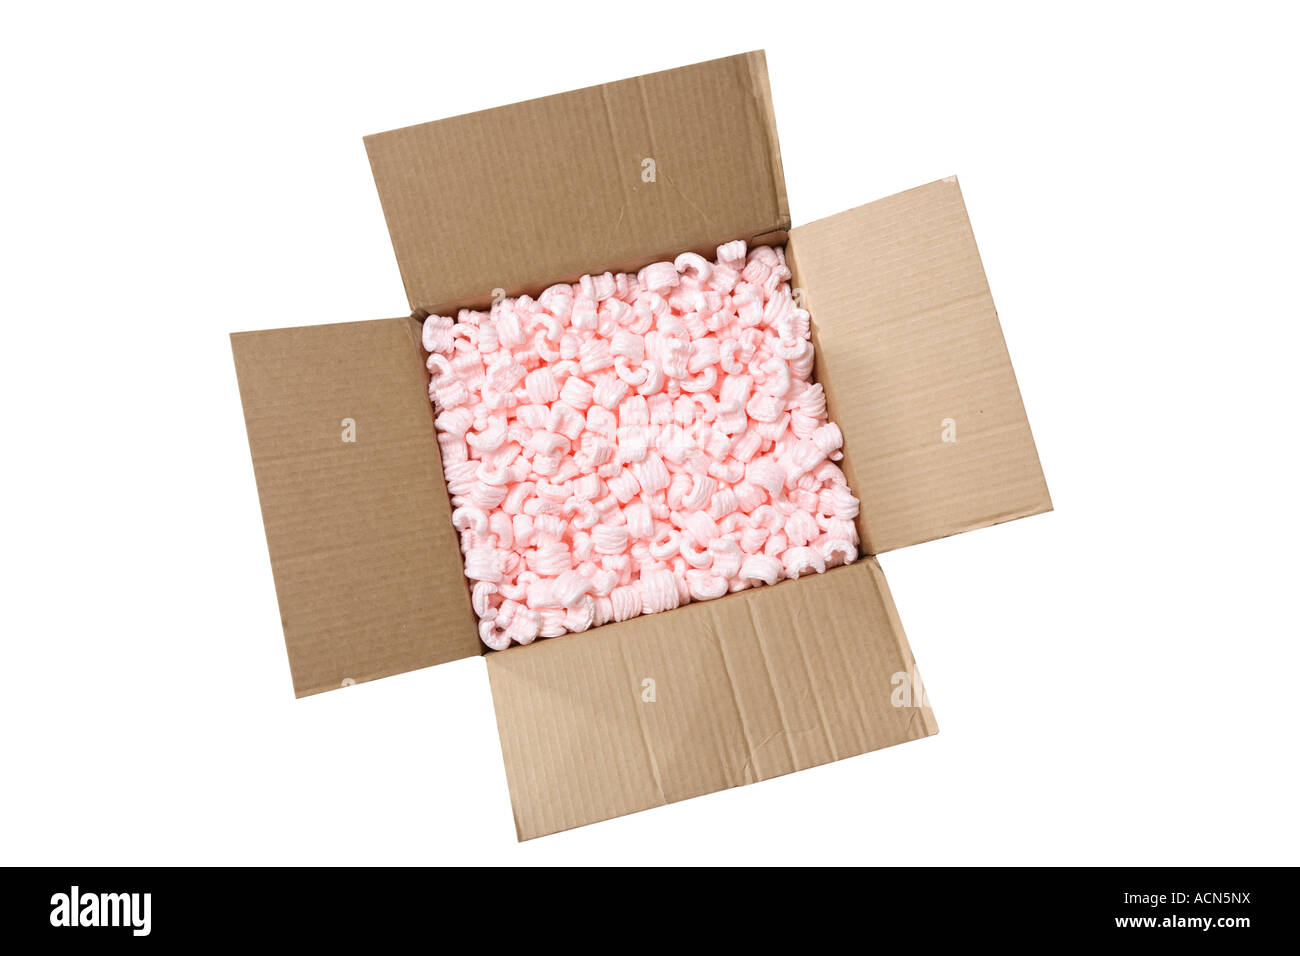 Cardboard box with Styrofoam packaging cut out on white background Stock Photo